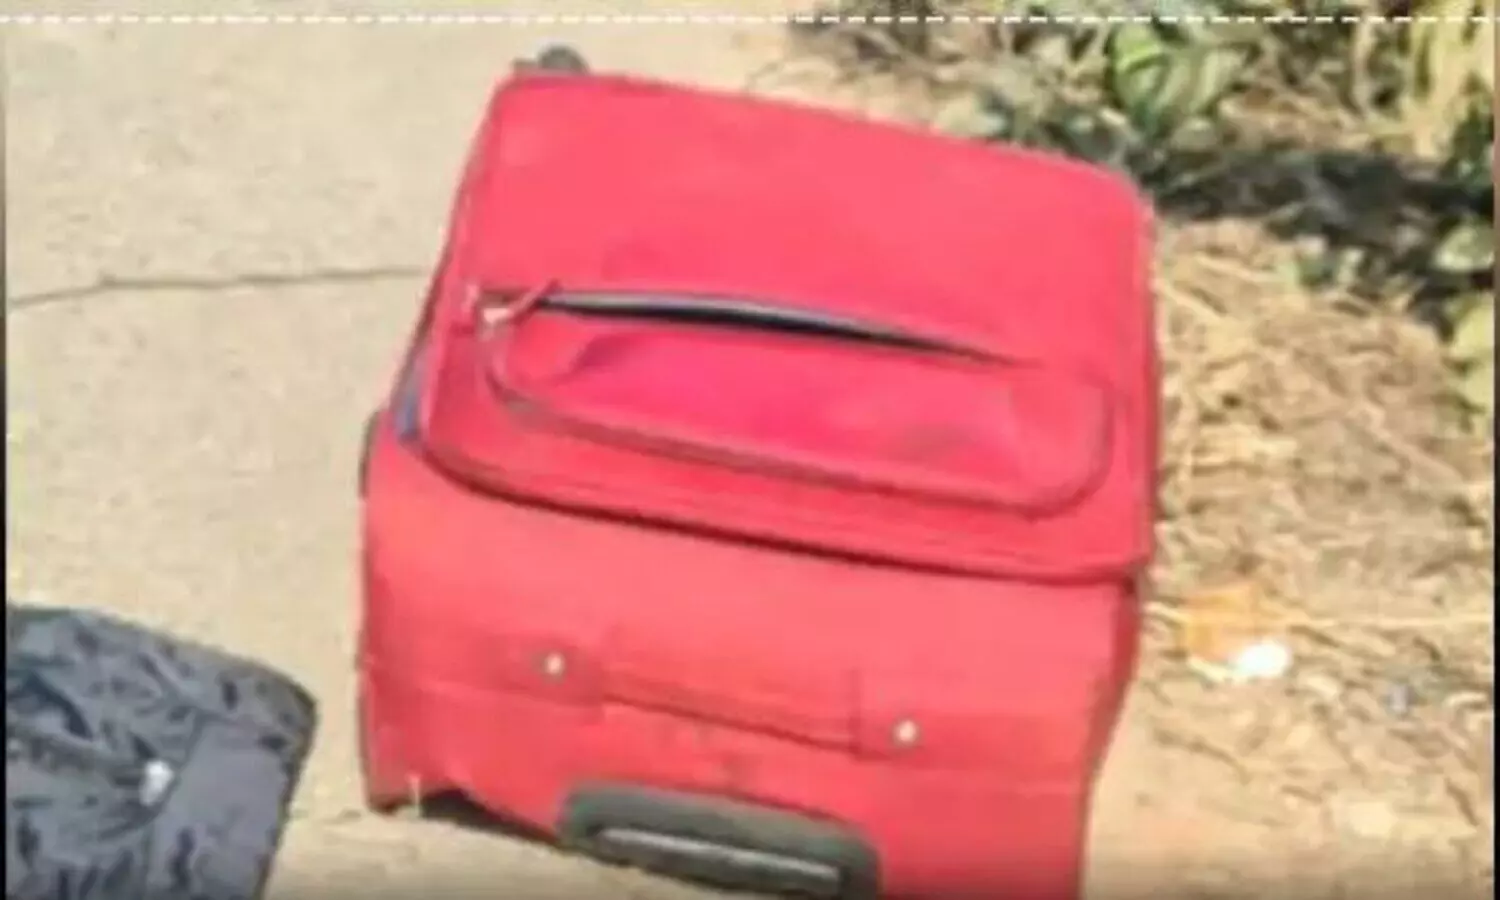 Dead body in red suitcase